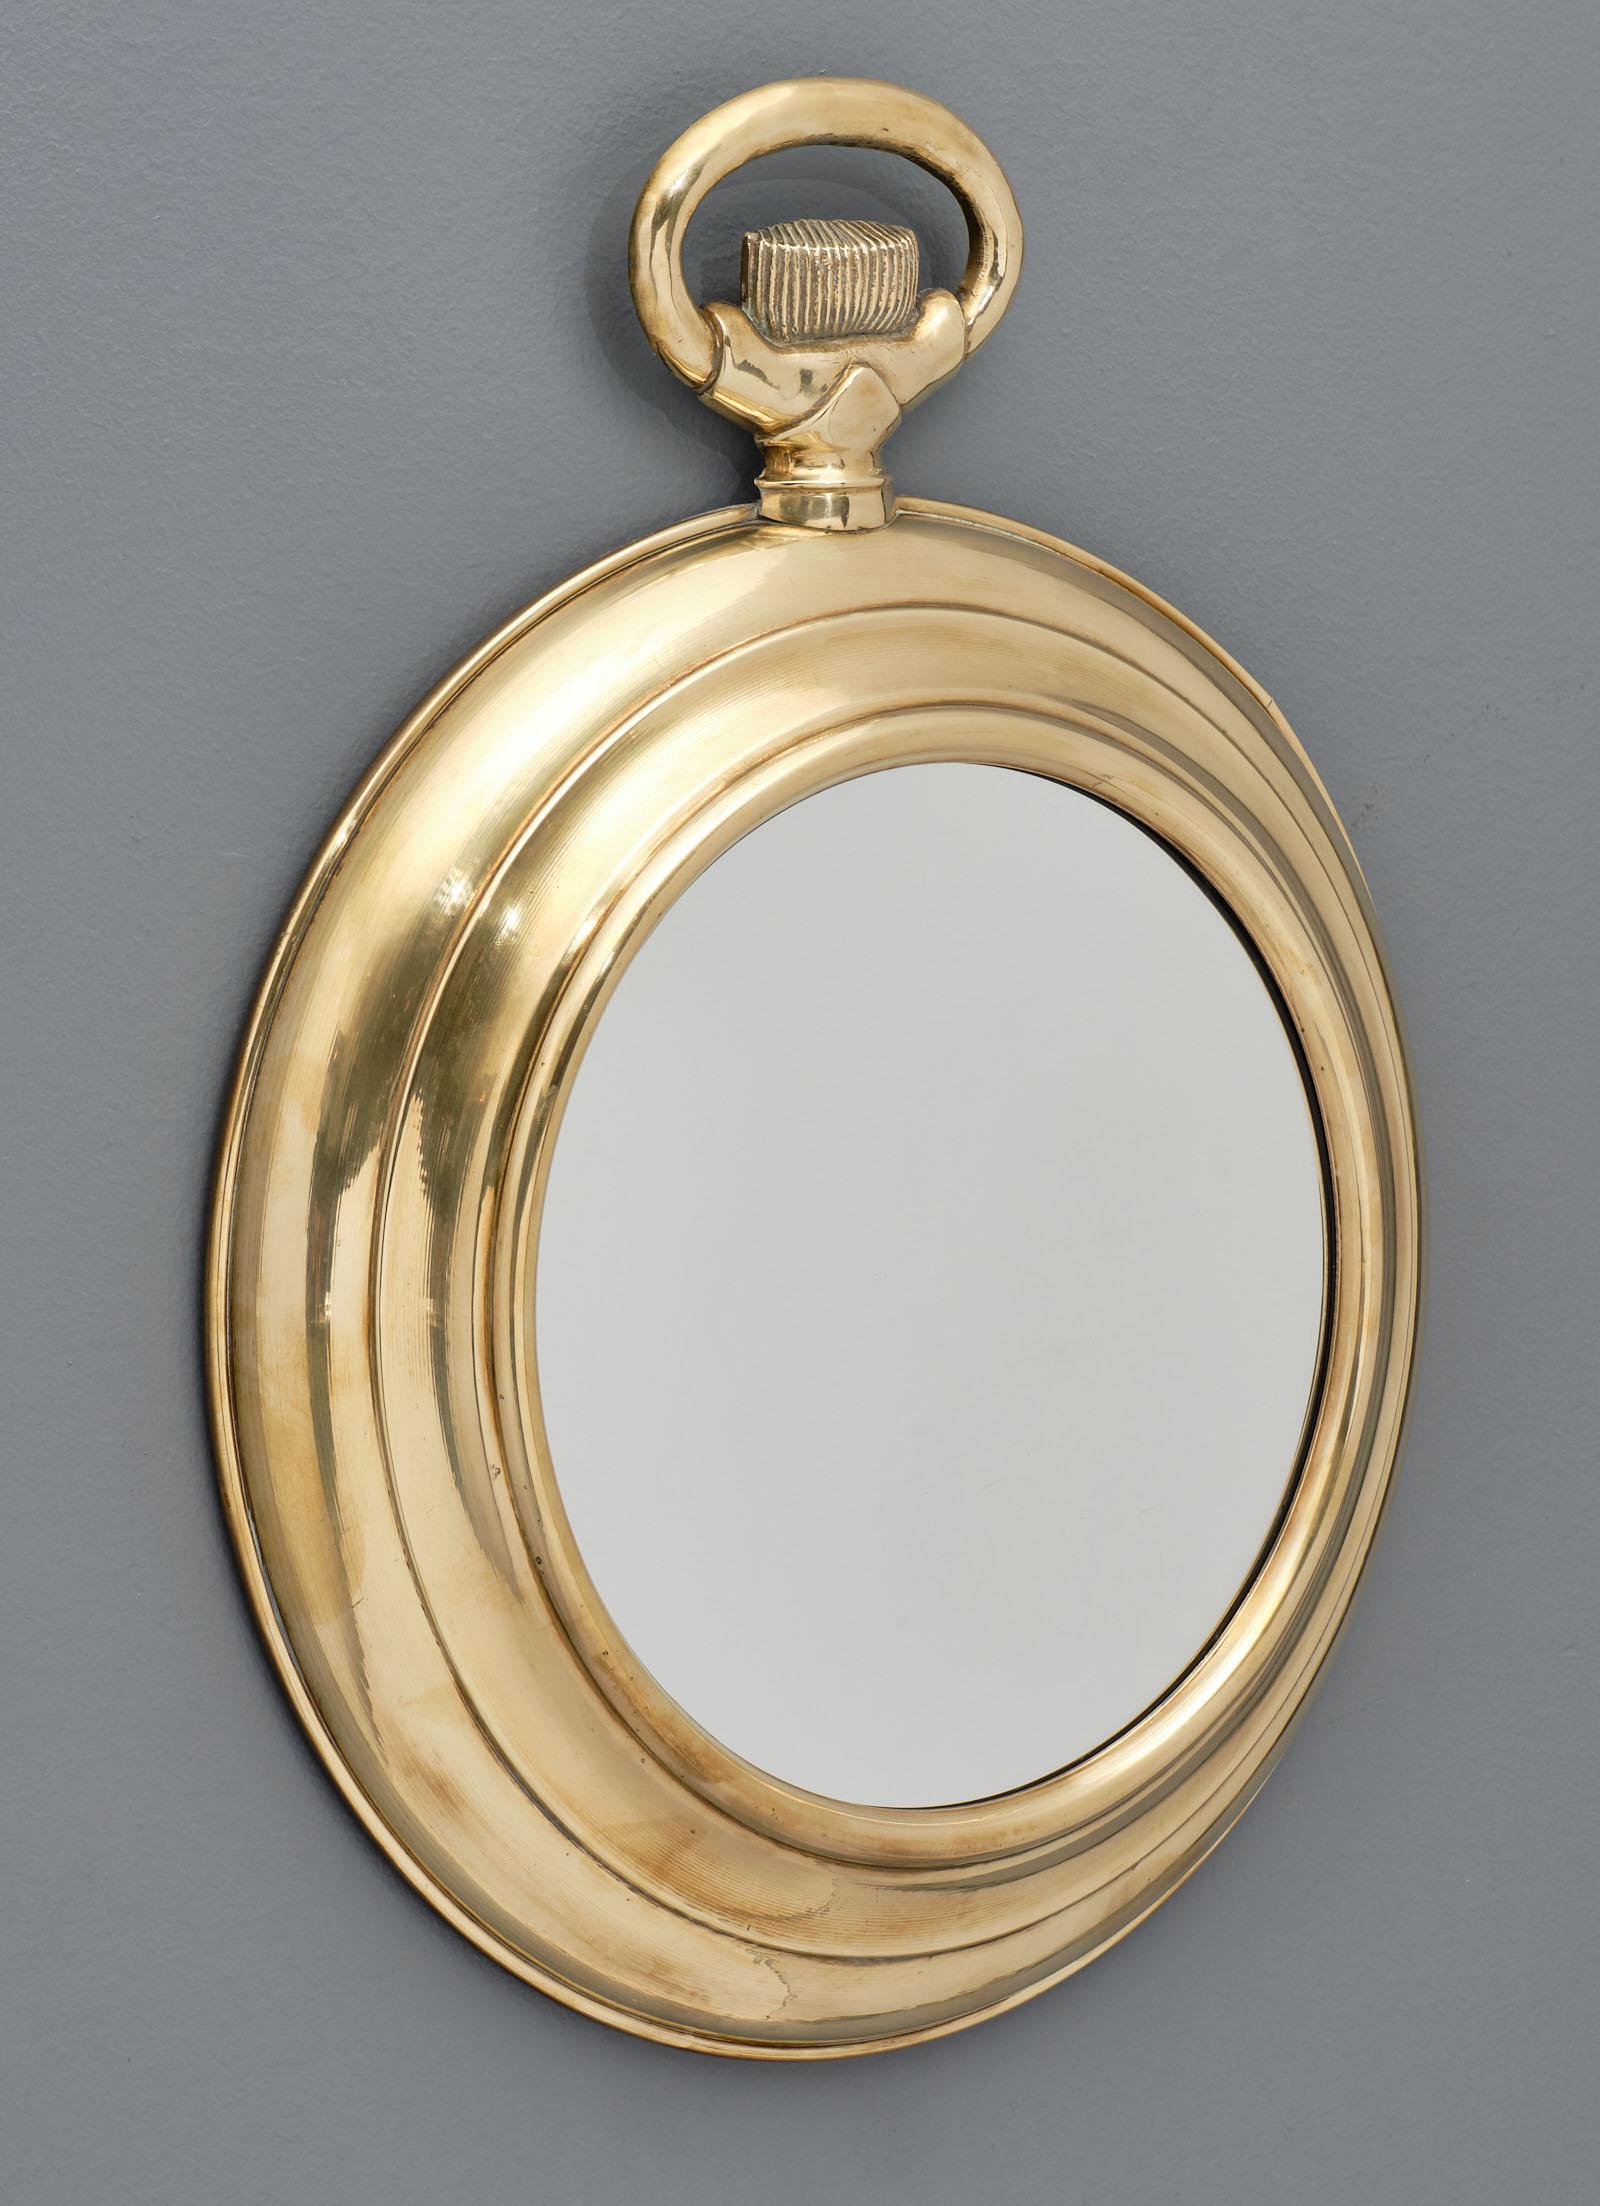 Brass vintage pocket watch mirror from the Art Deco period in France. We love the unique and unexpected shape of this vintage piece!